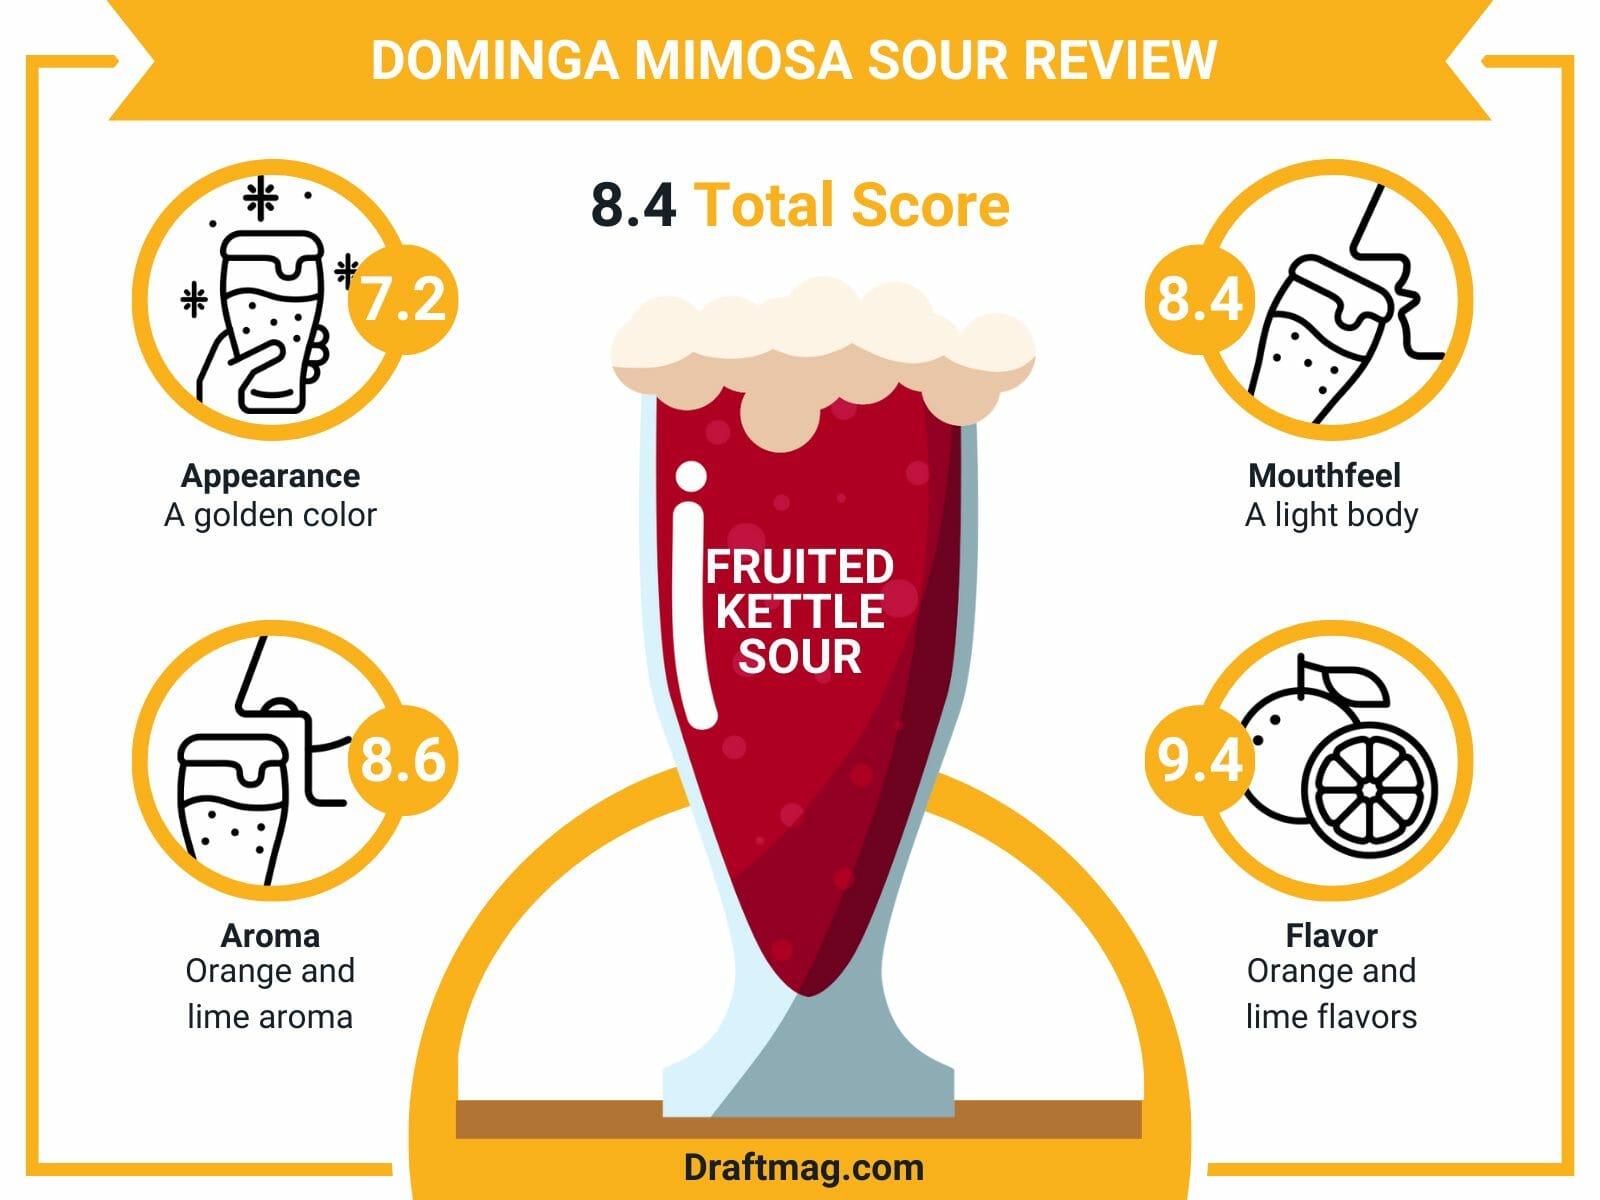 Dominga mimosa sour review infographic